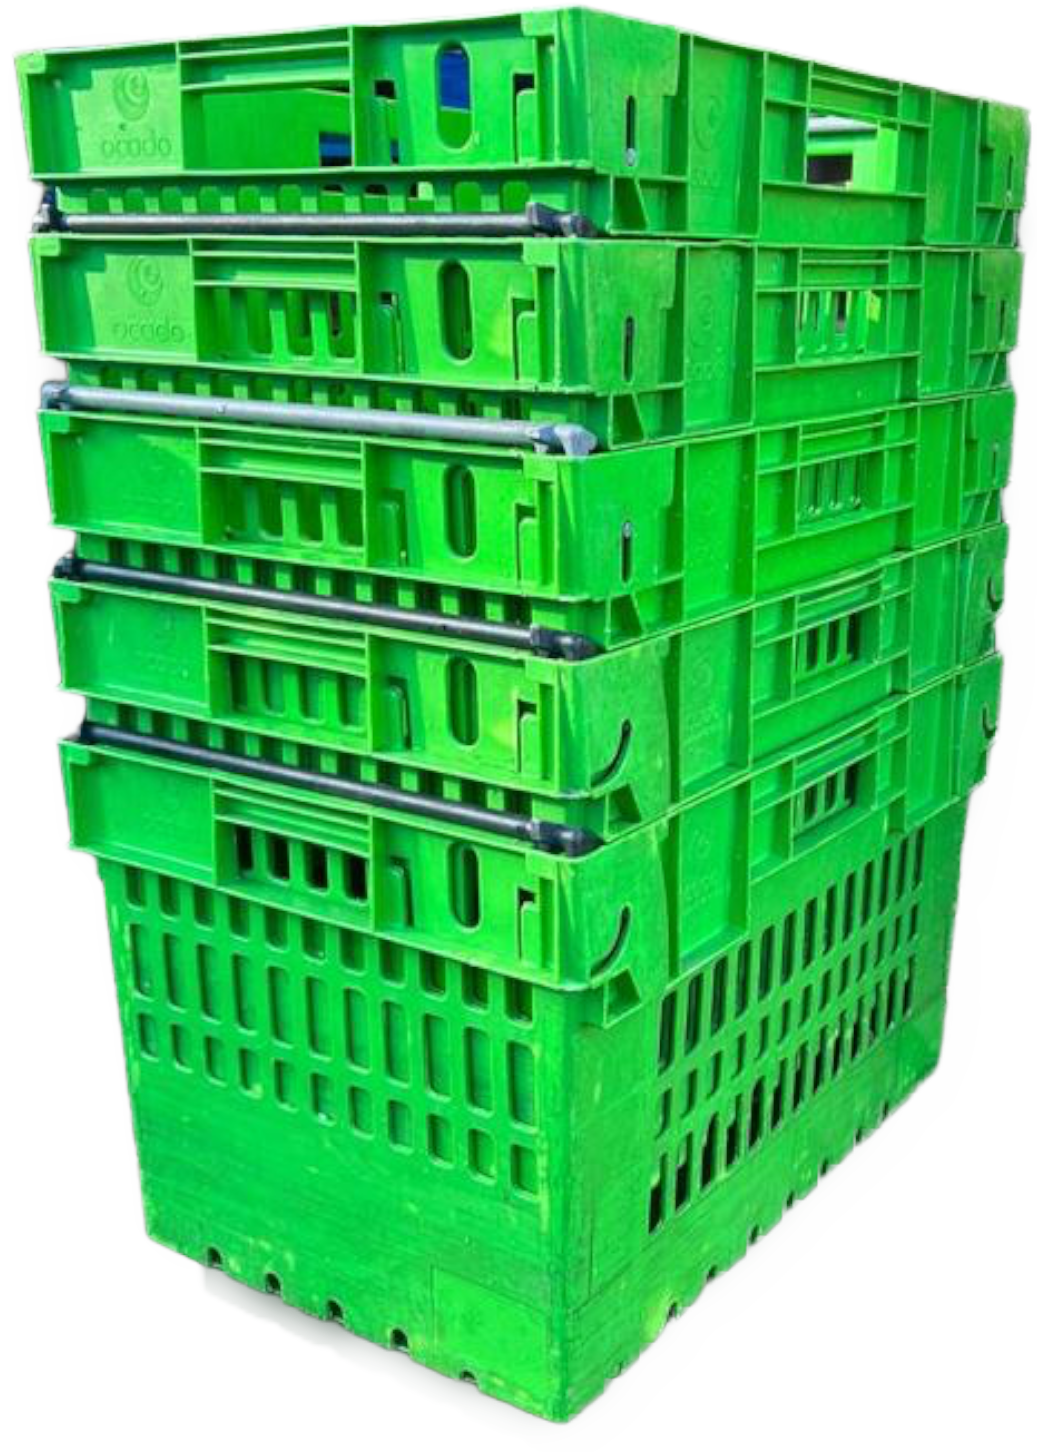 UK Suppliers Of 400x300x300 Black Eco Lidded Container (28 Ltr) For Agricultural Industry